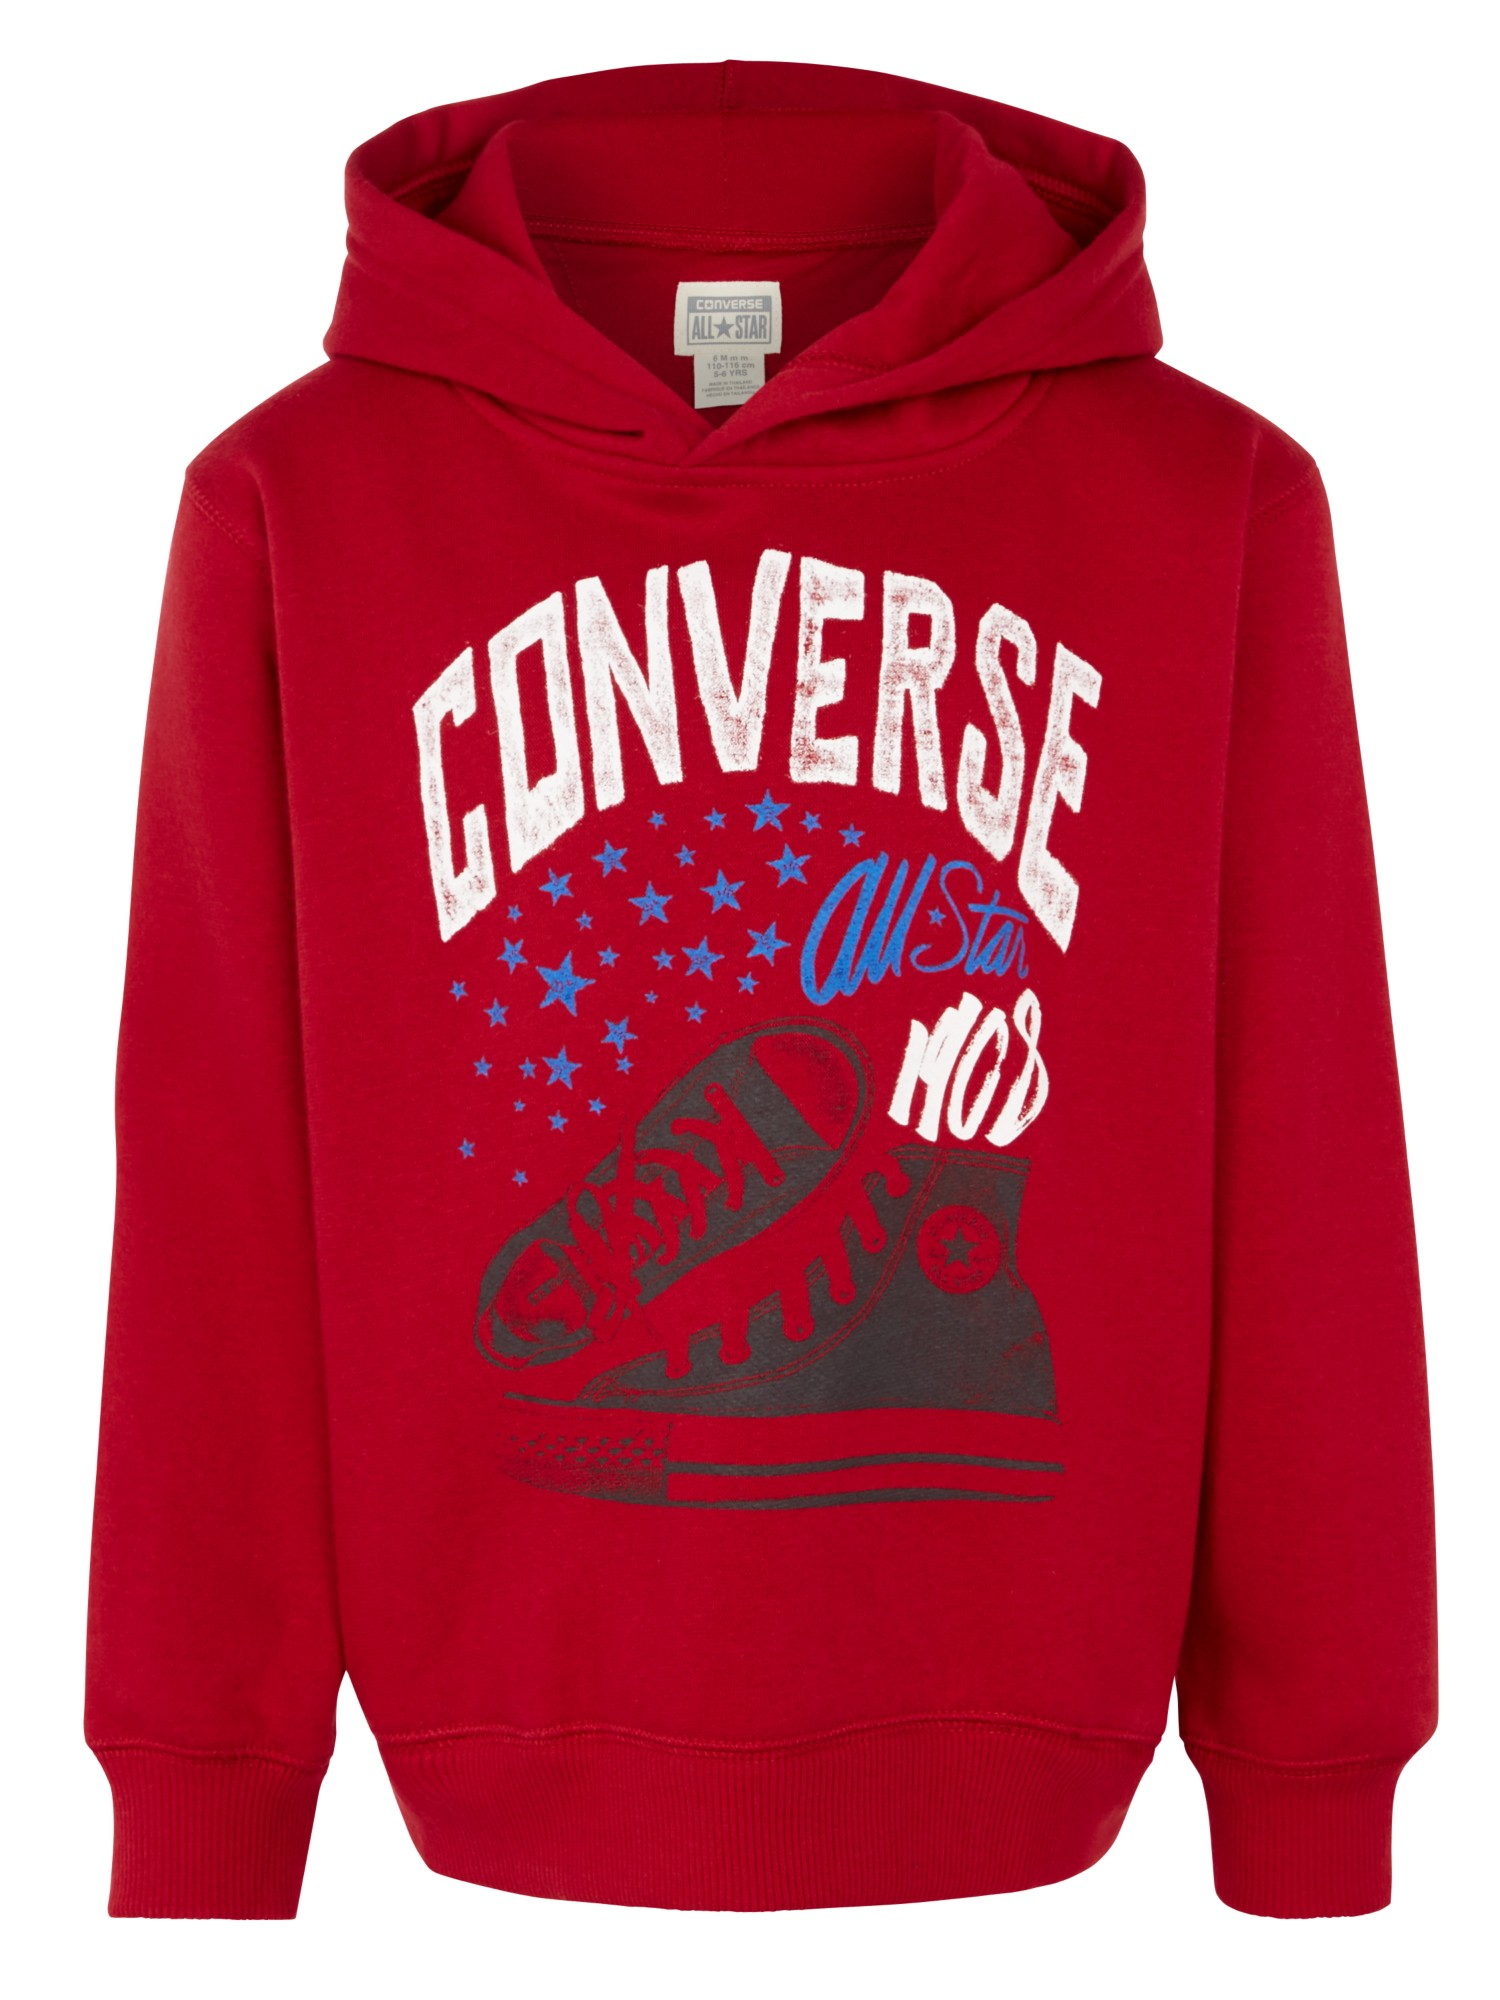 converse jumpers for boys